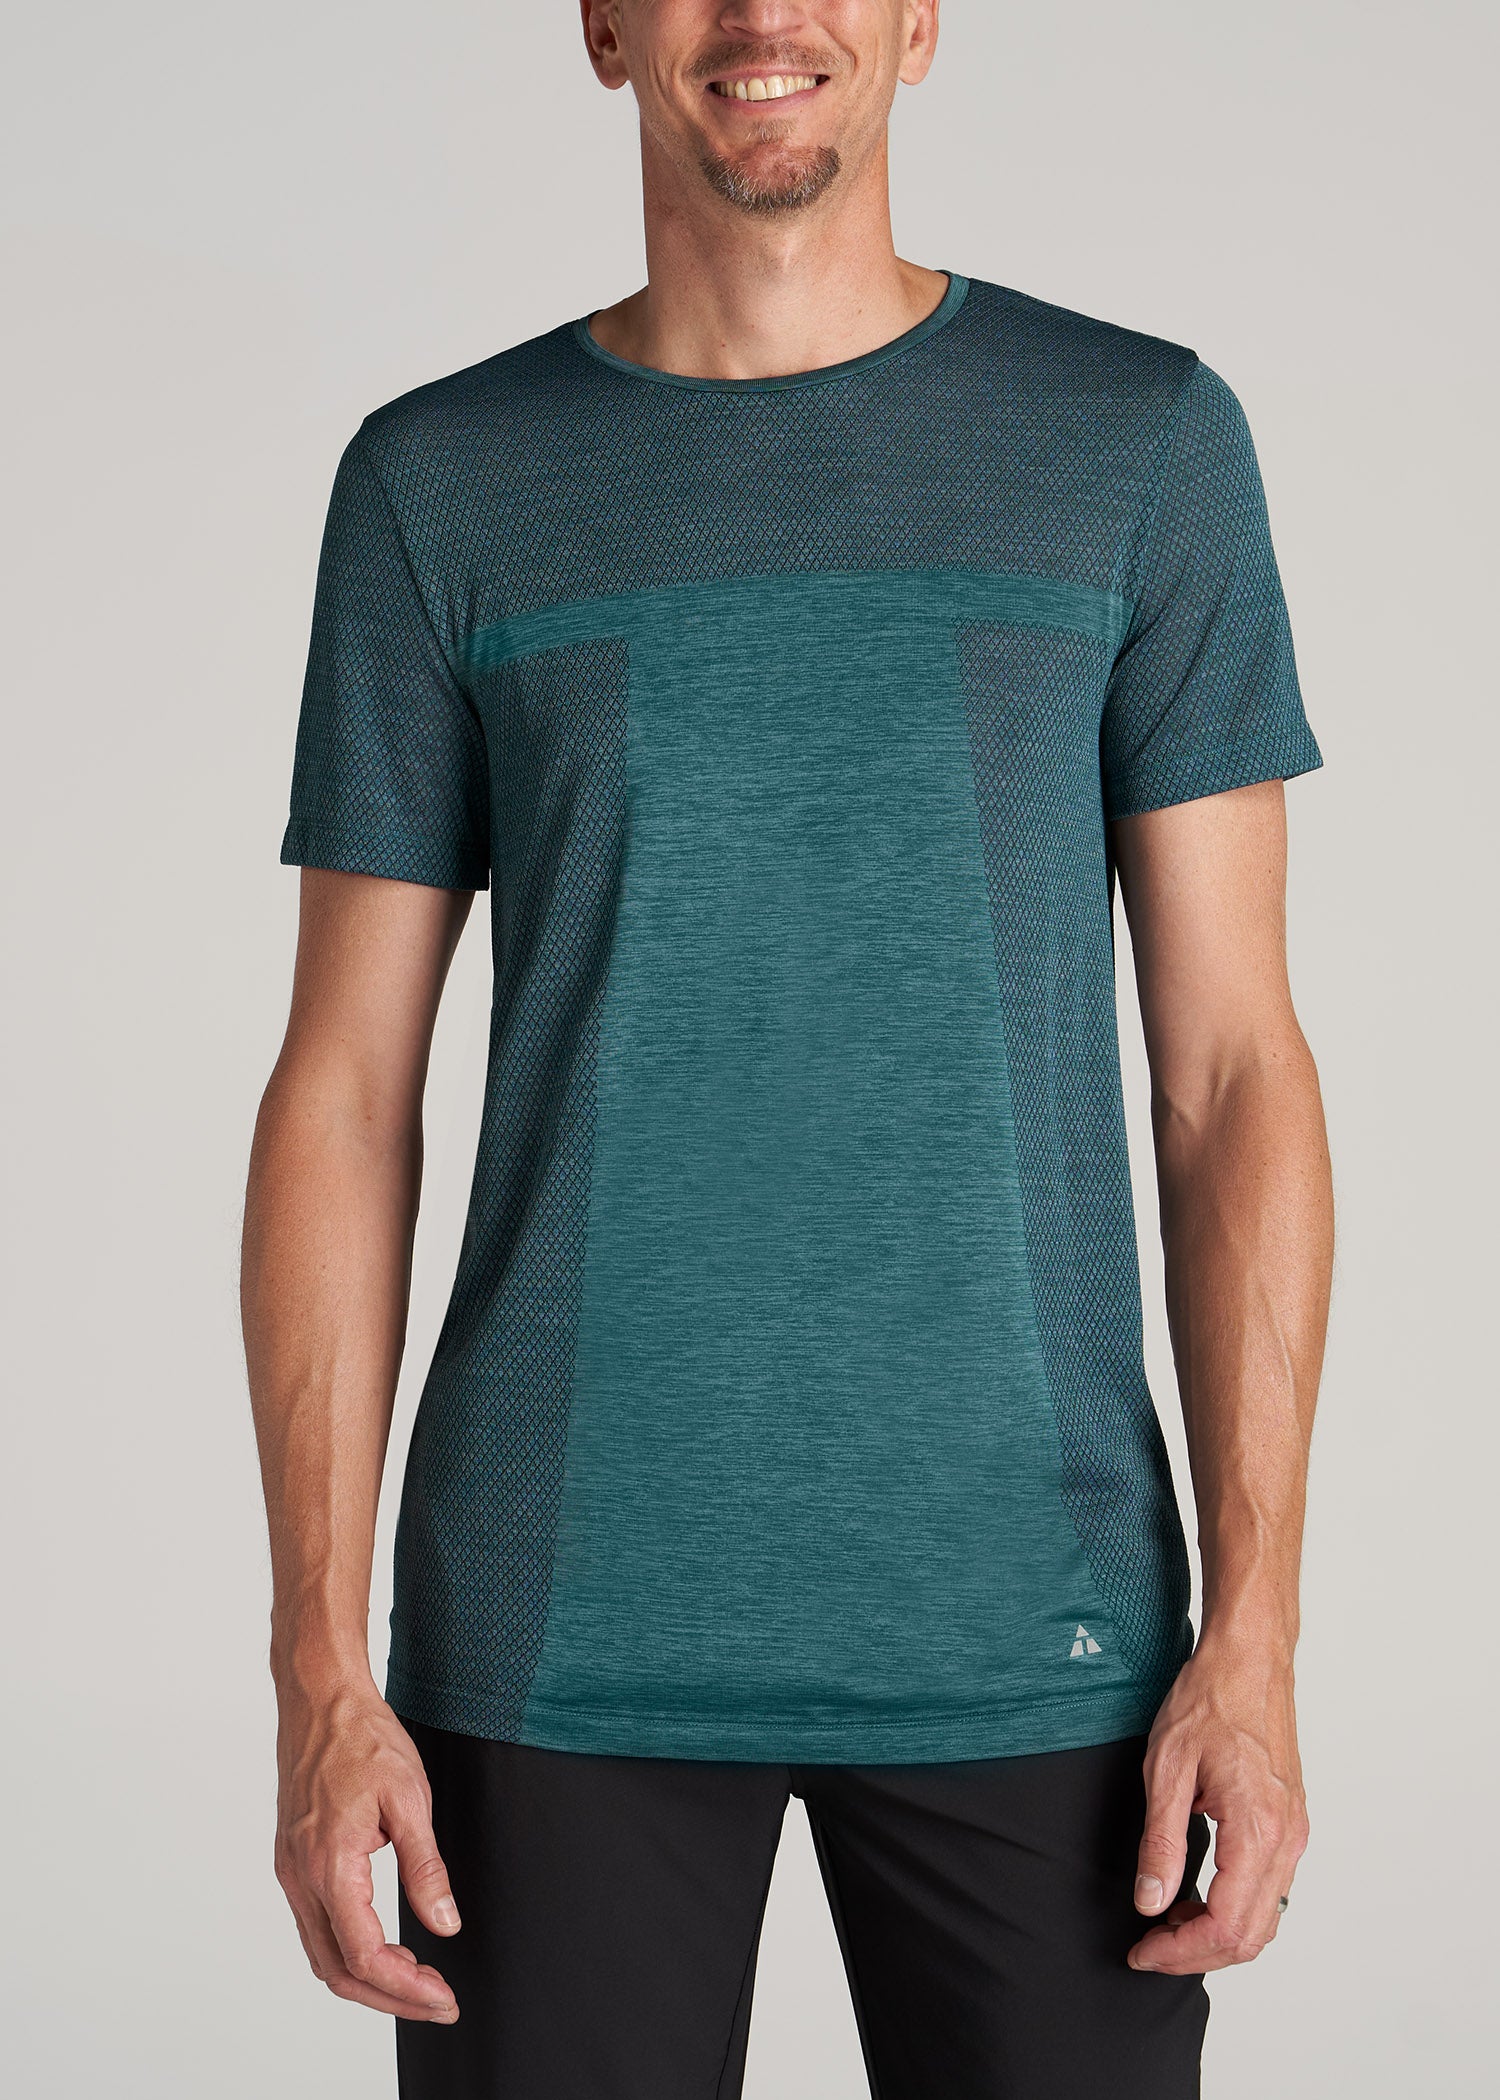 American-Tall-Men-AT-Performance-Short-Sleeve-Jersey-Athletic-Crewneck-Engineered-Tee-Teal-Mix-front